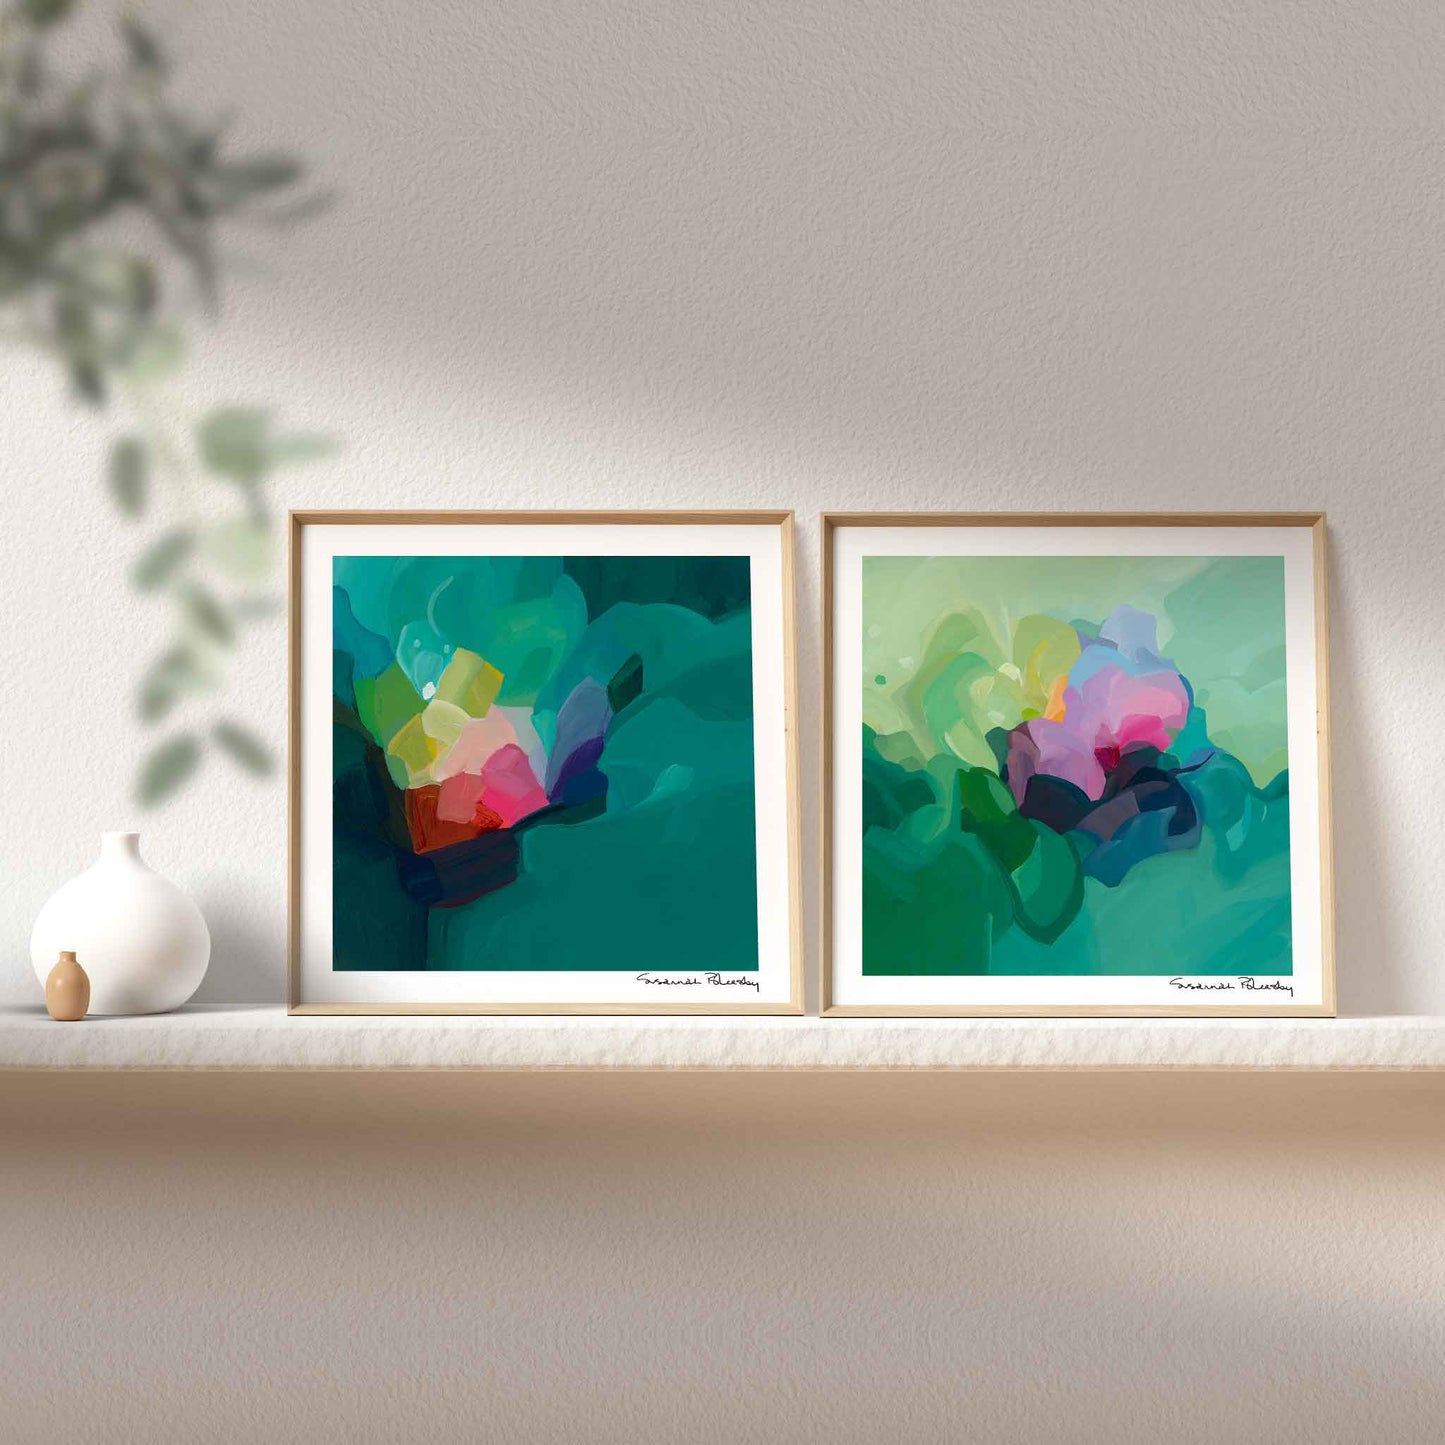 a colorful abstract art display with a pair of jade green and pine green framed abstract art prints